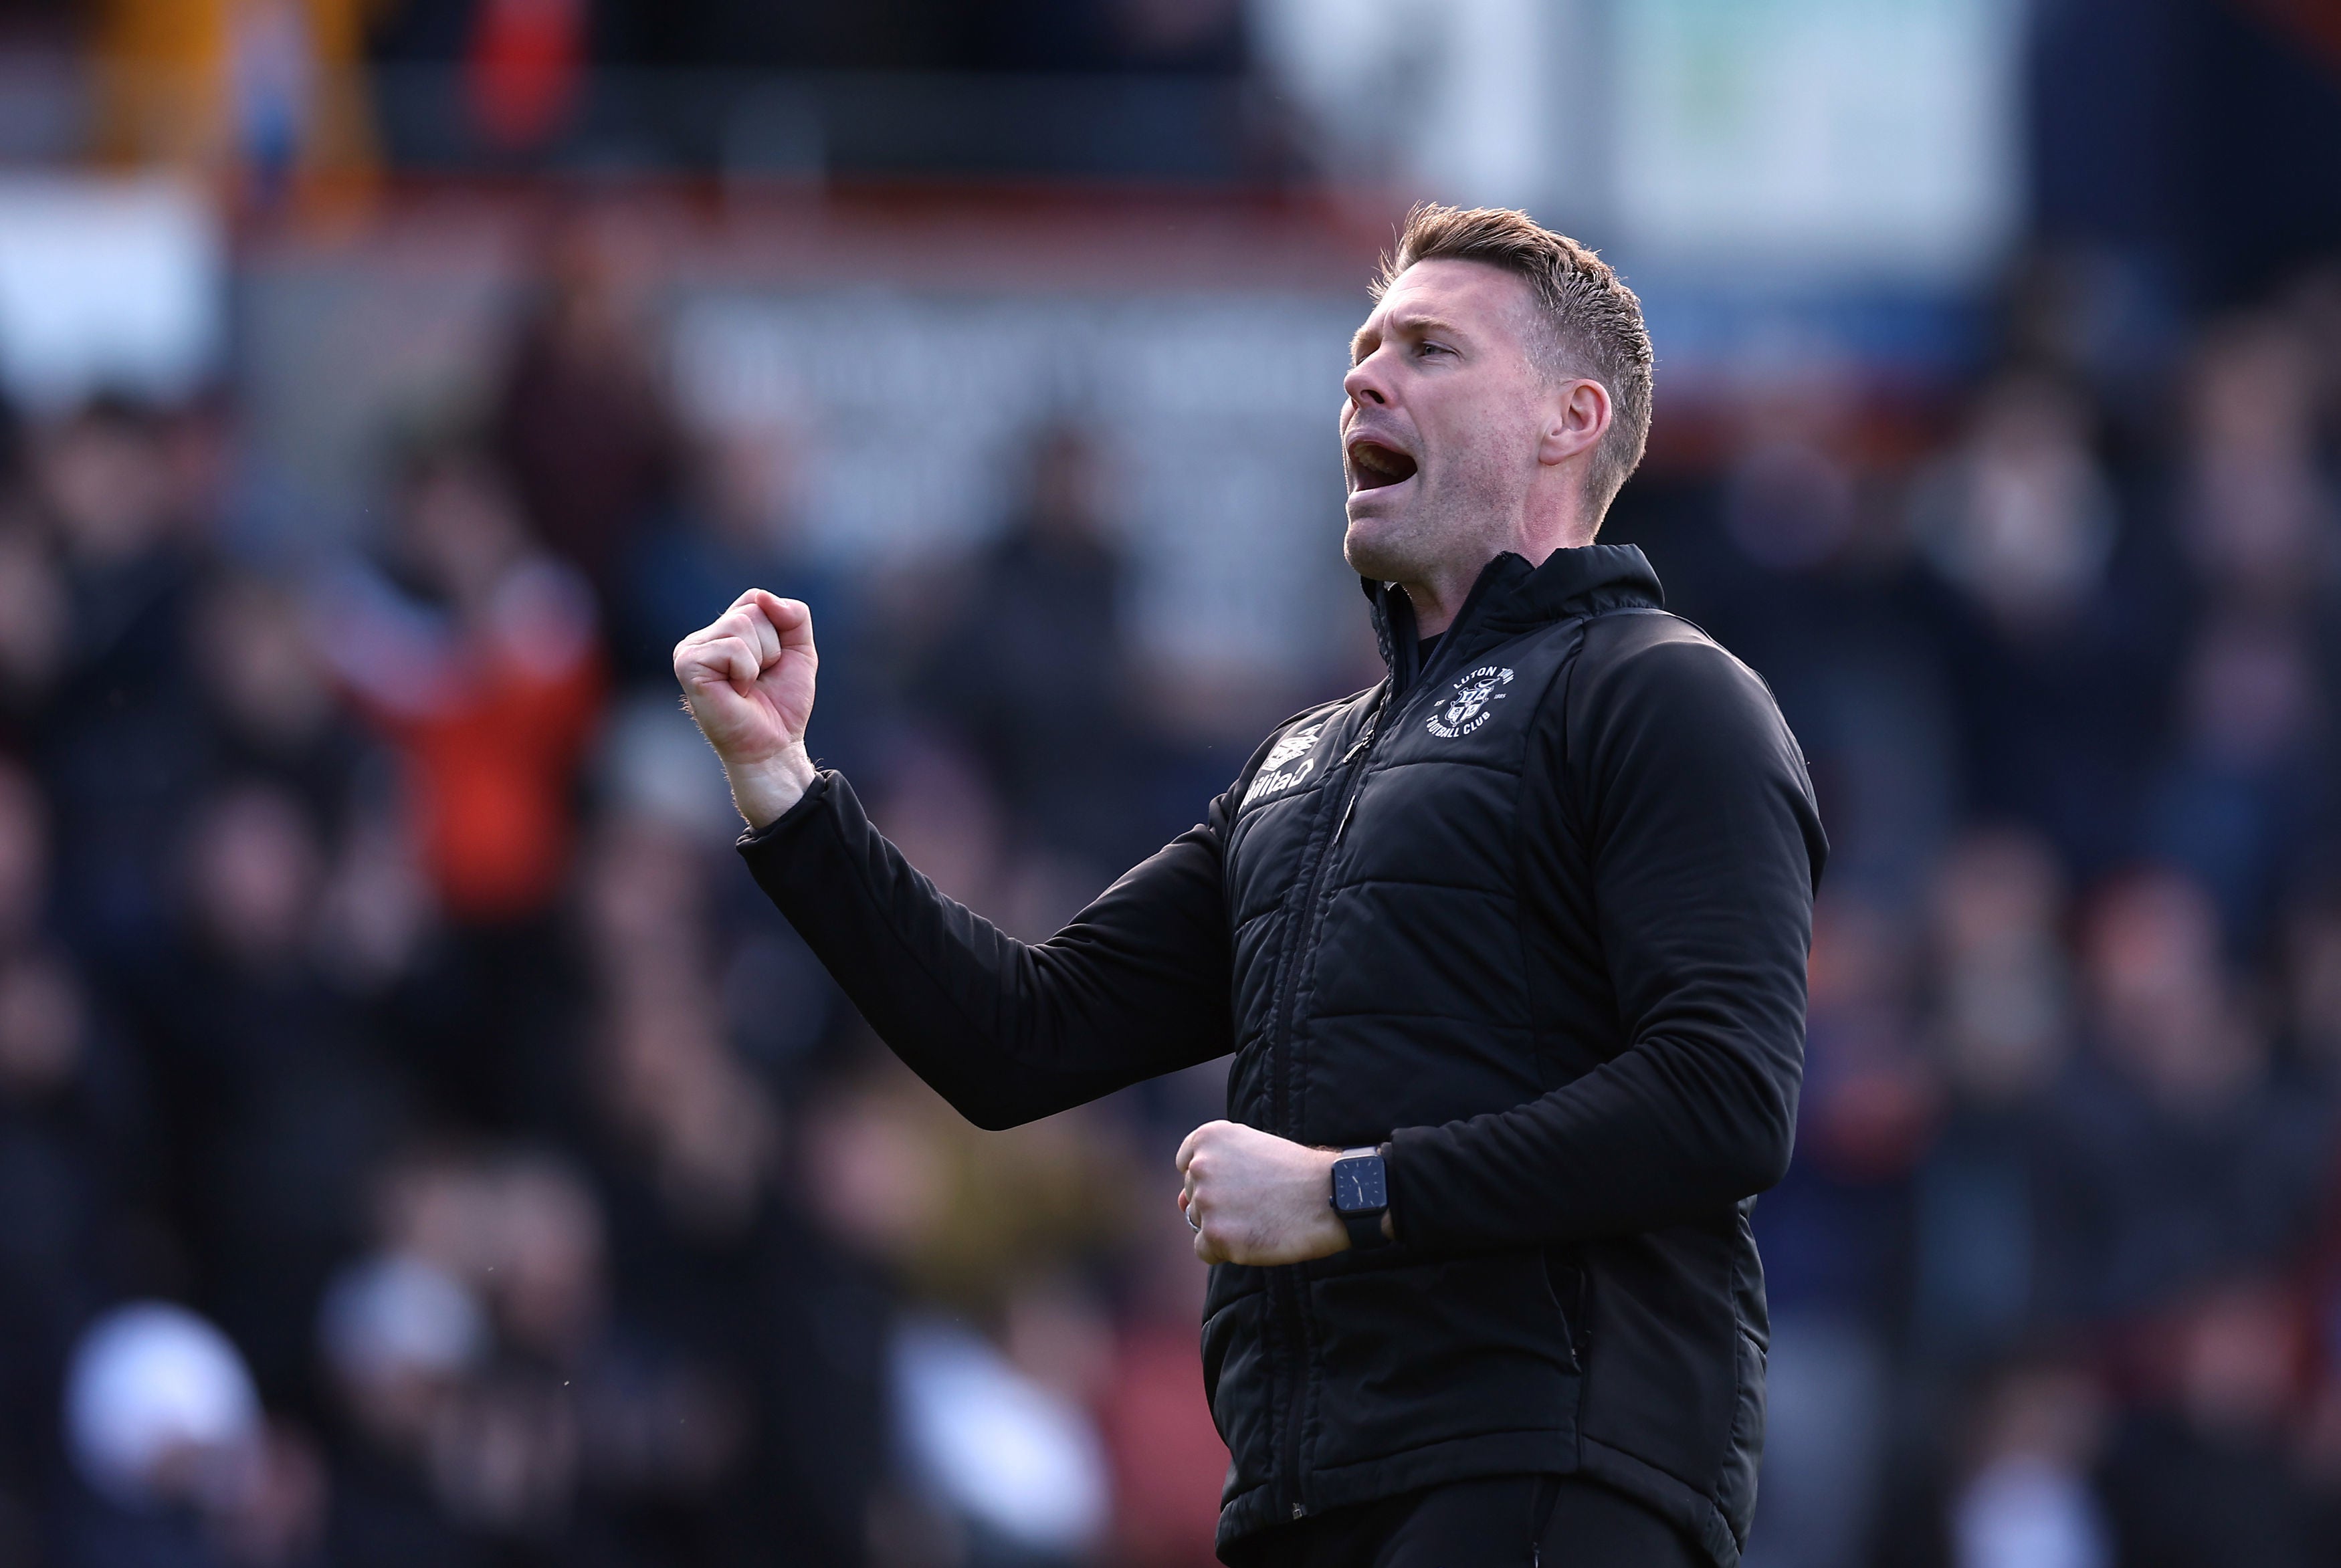 Rob Edwards has guided Luton into contention for promotion to the Premier League